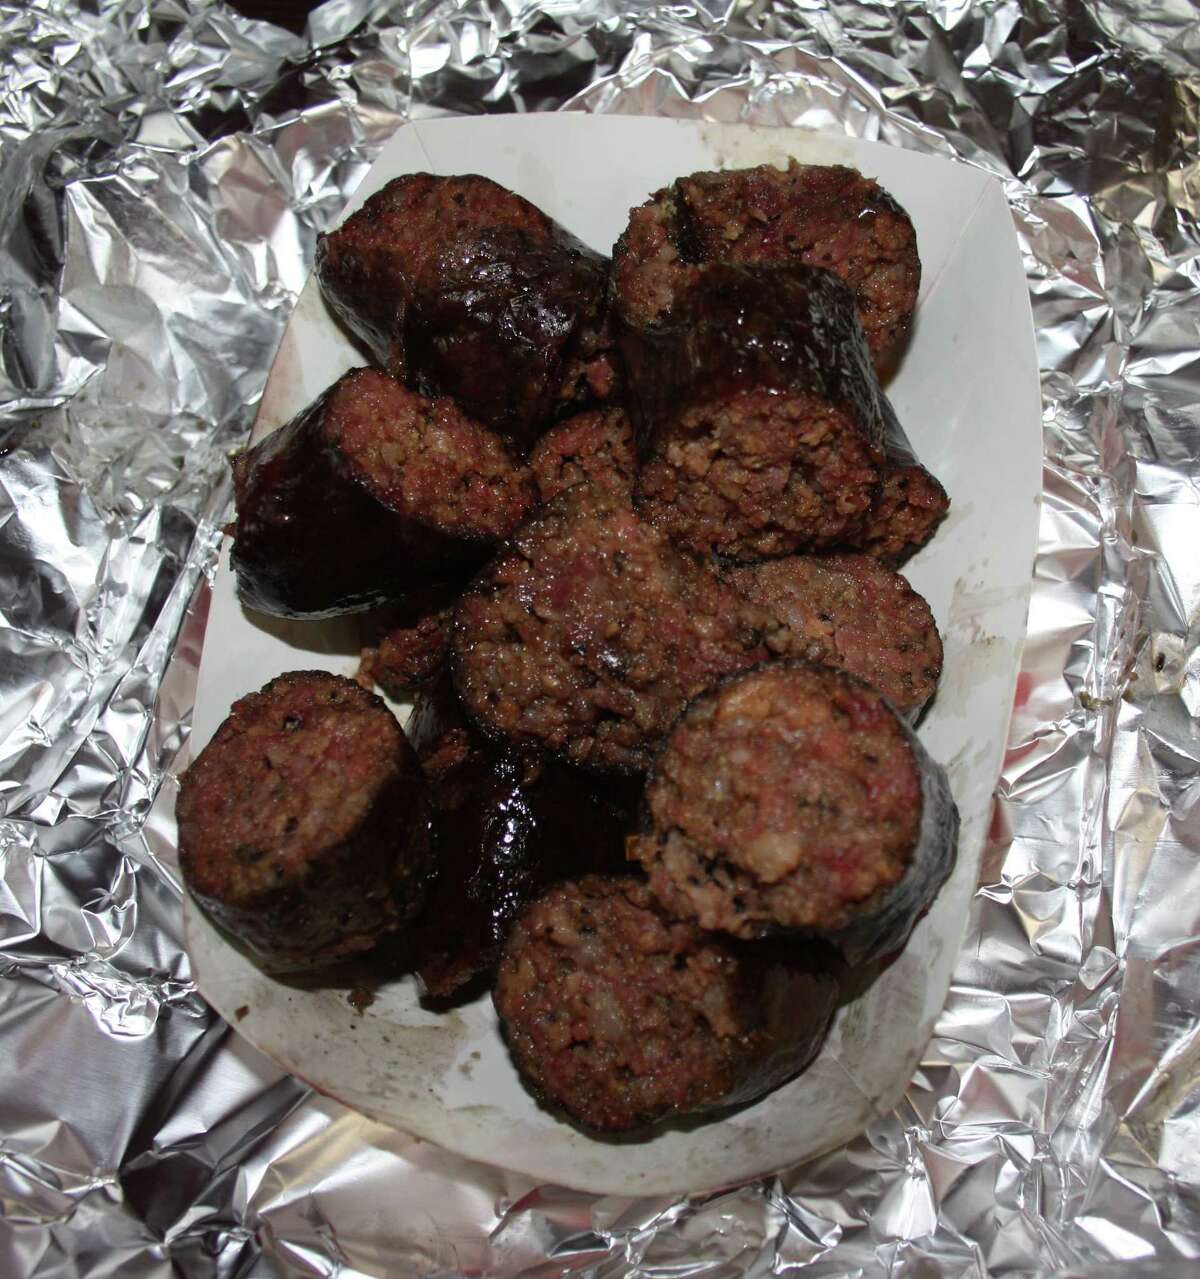 The beef sausage is house-made at Jones Sausage & Bar-B-Que, using a recipe that was first developed by original owner Floyd Jones.